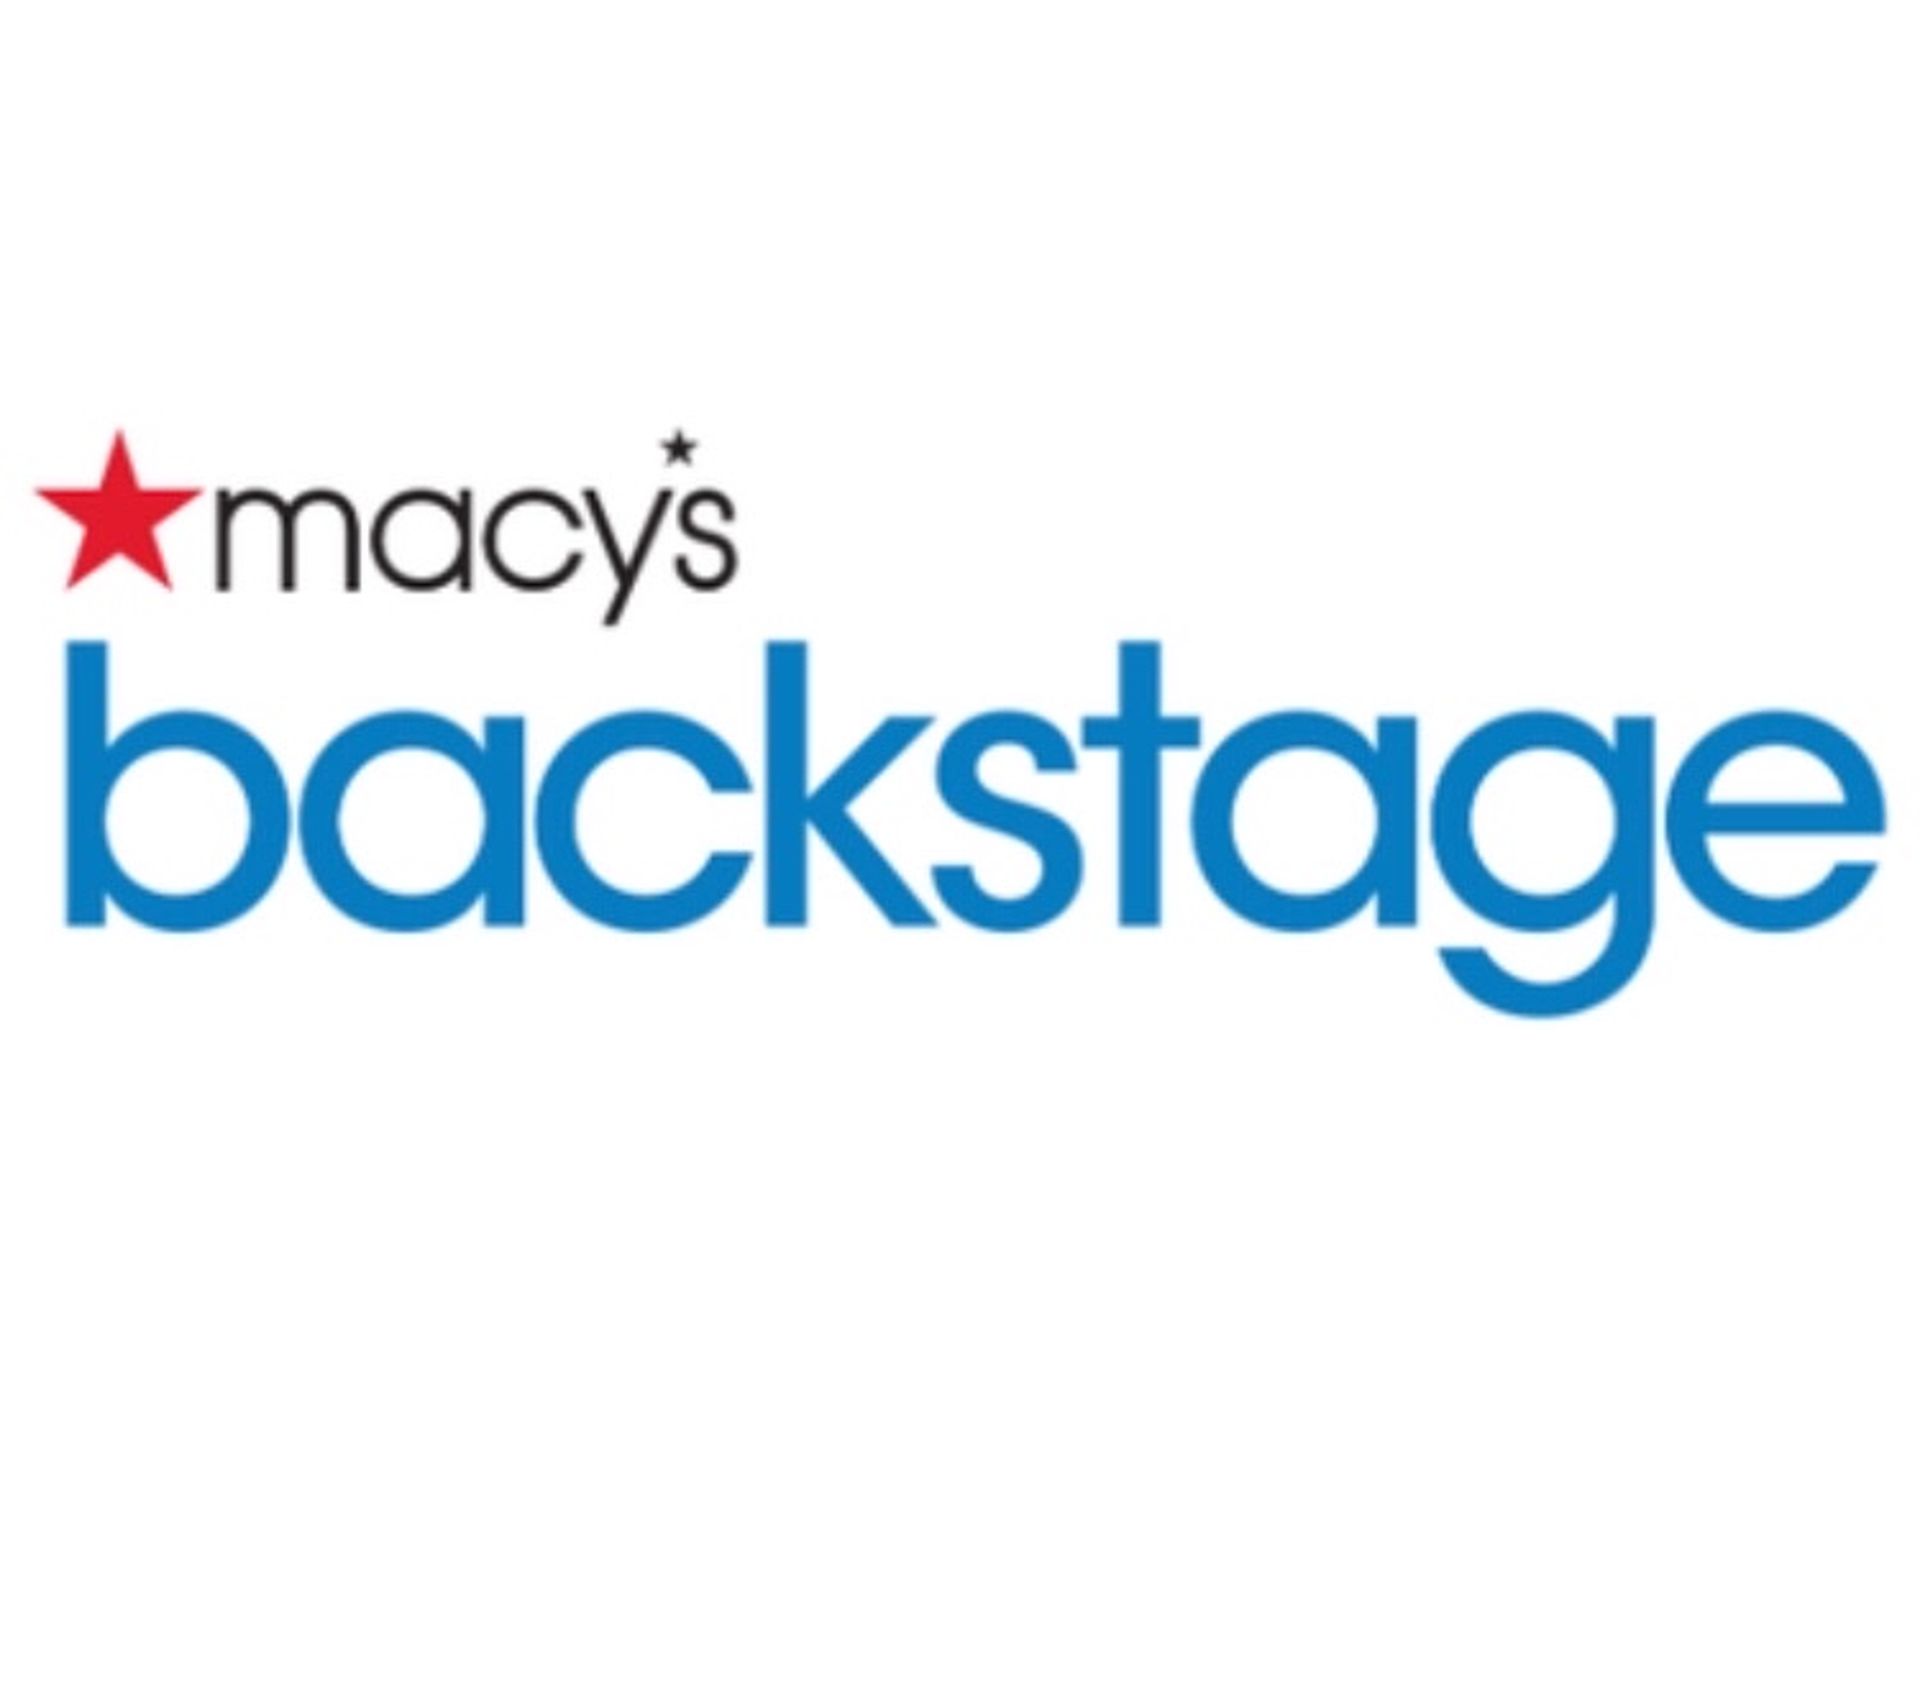 Macy's is opening 45 Backstage locations